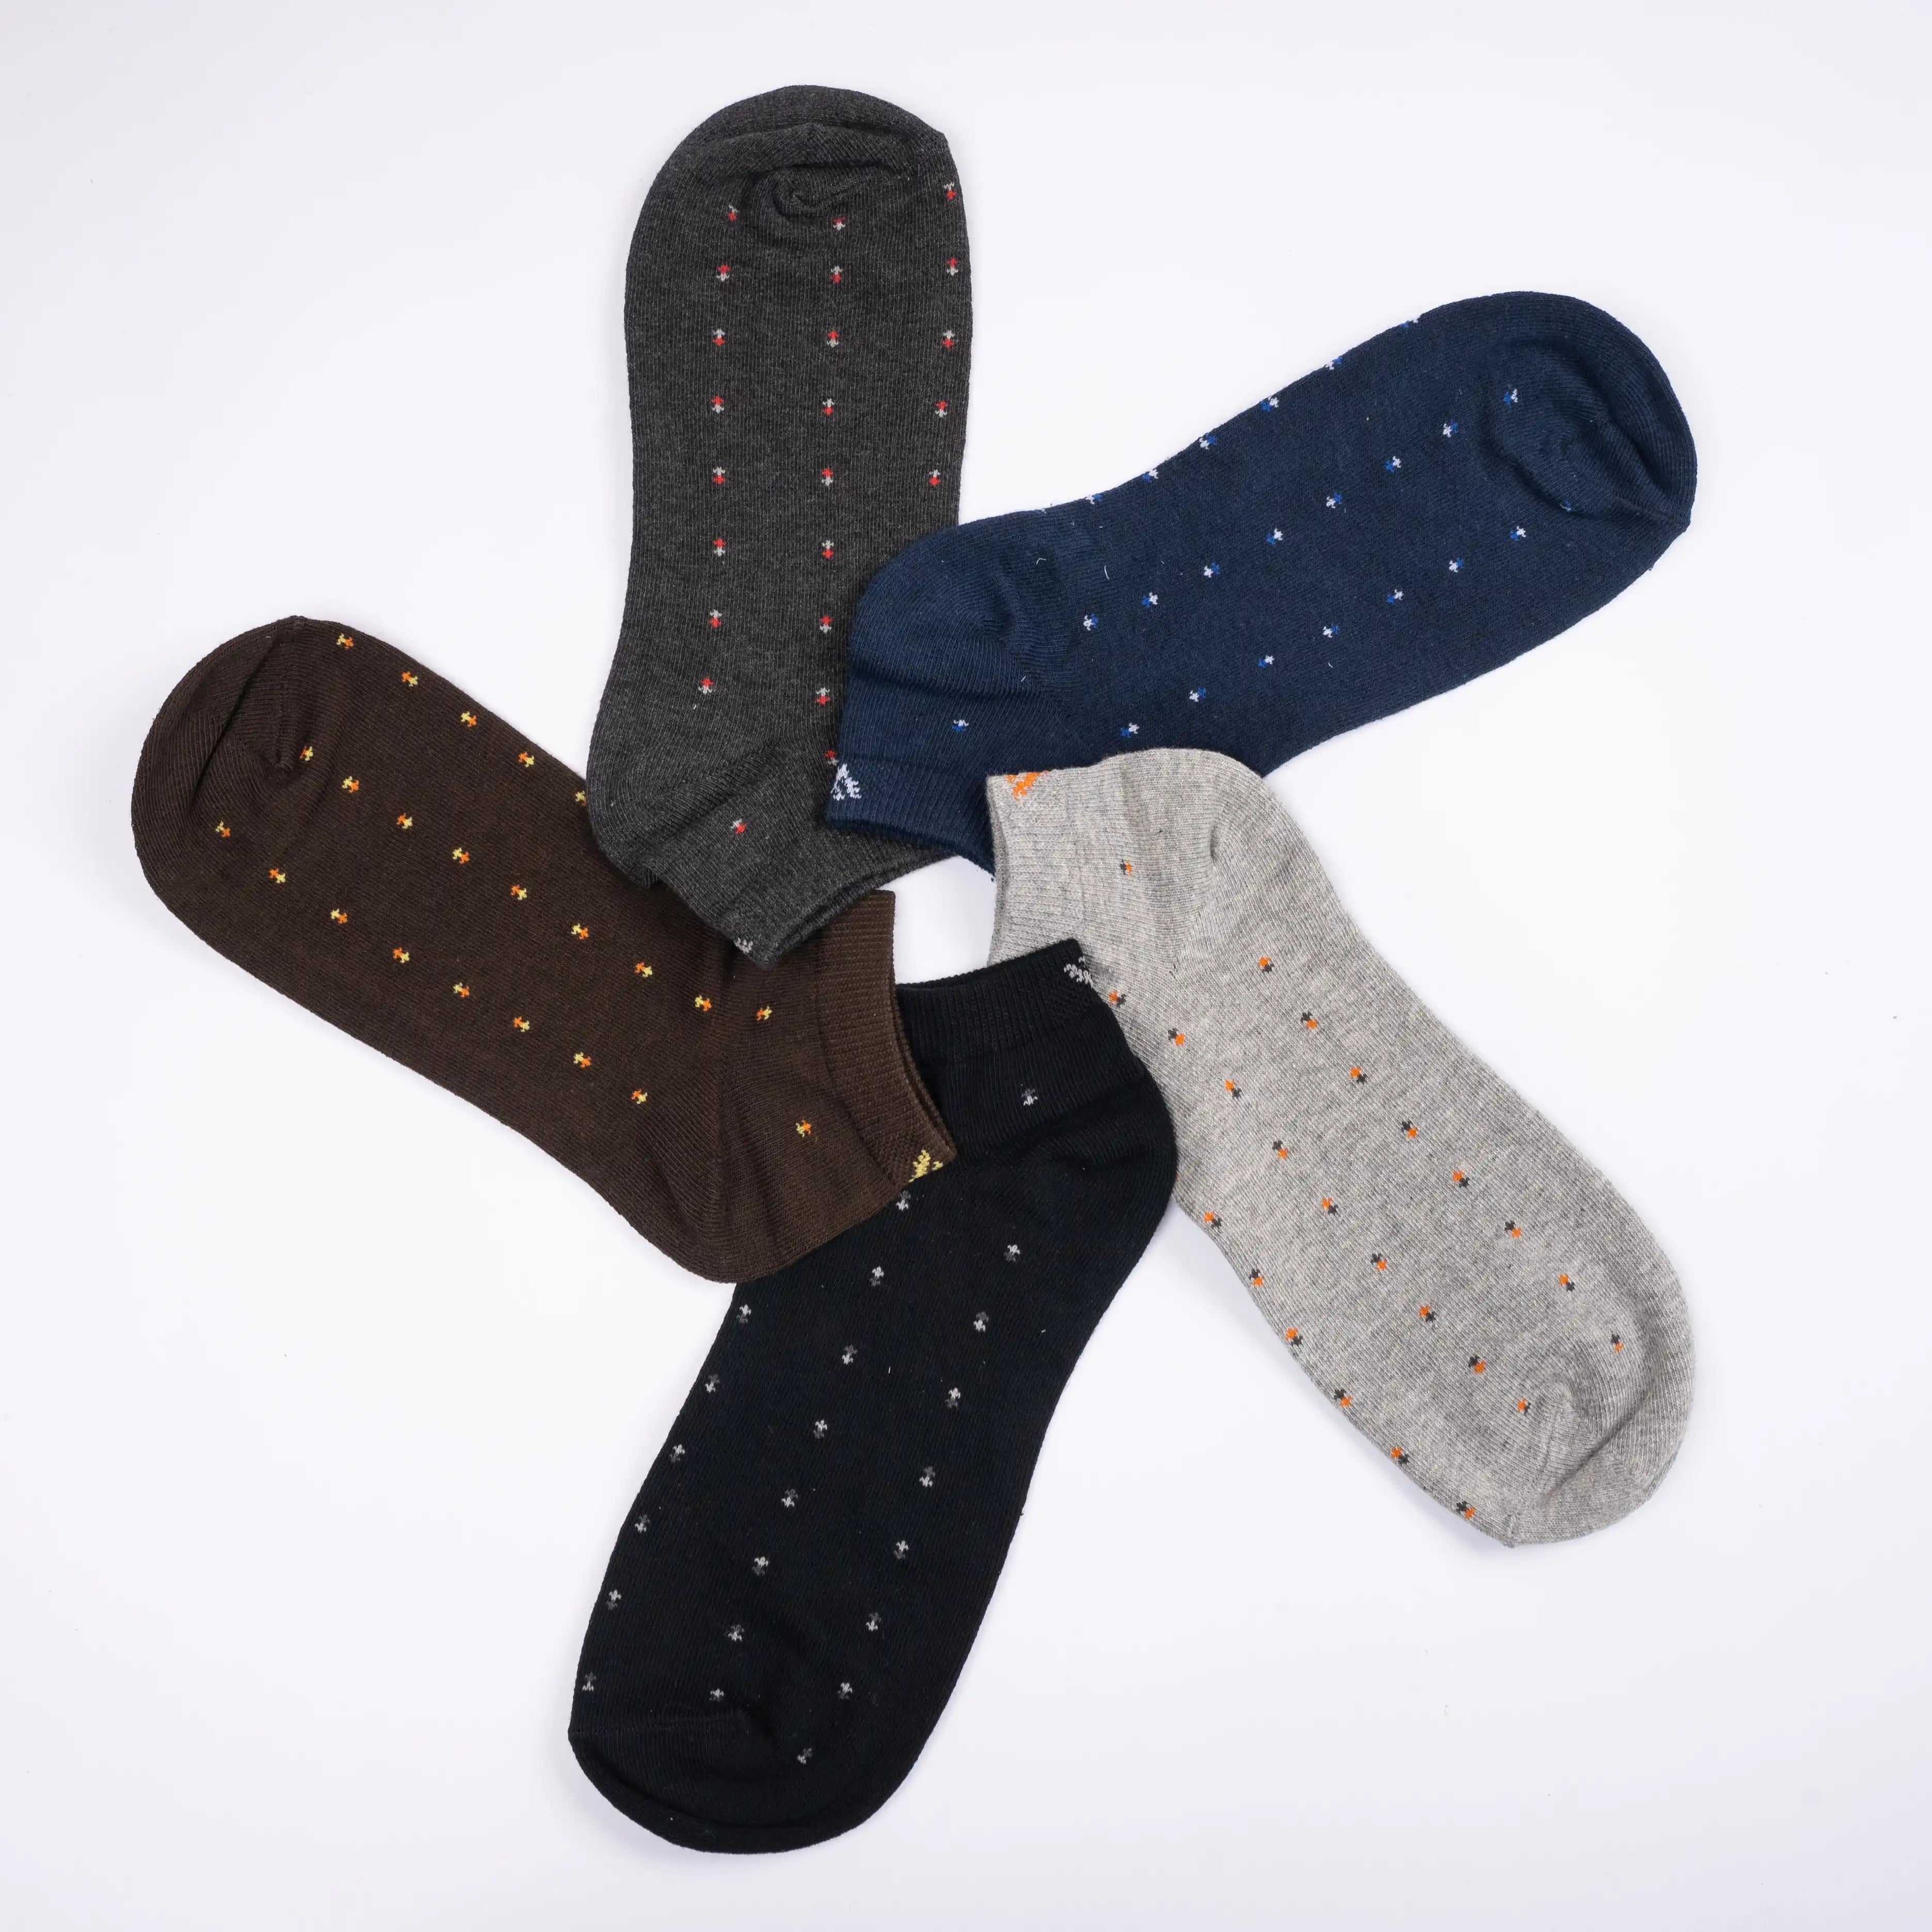 Young Wings Men's Multi Colour Cotton Fabric Design Low Ankle Length Socks - Pack of 5, Style no. 1708-M1